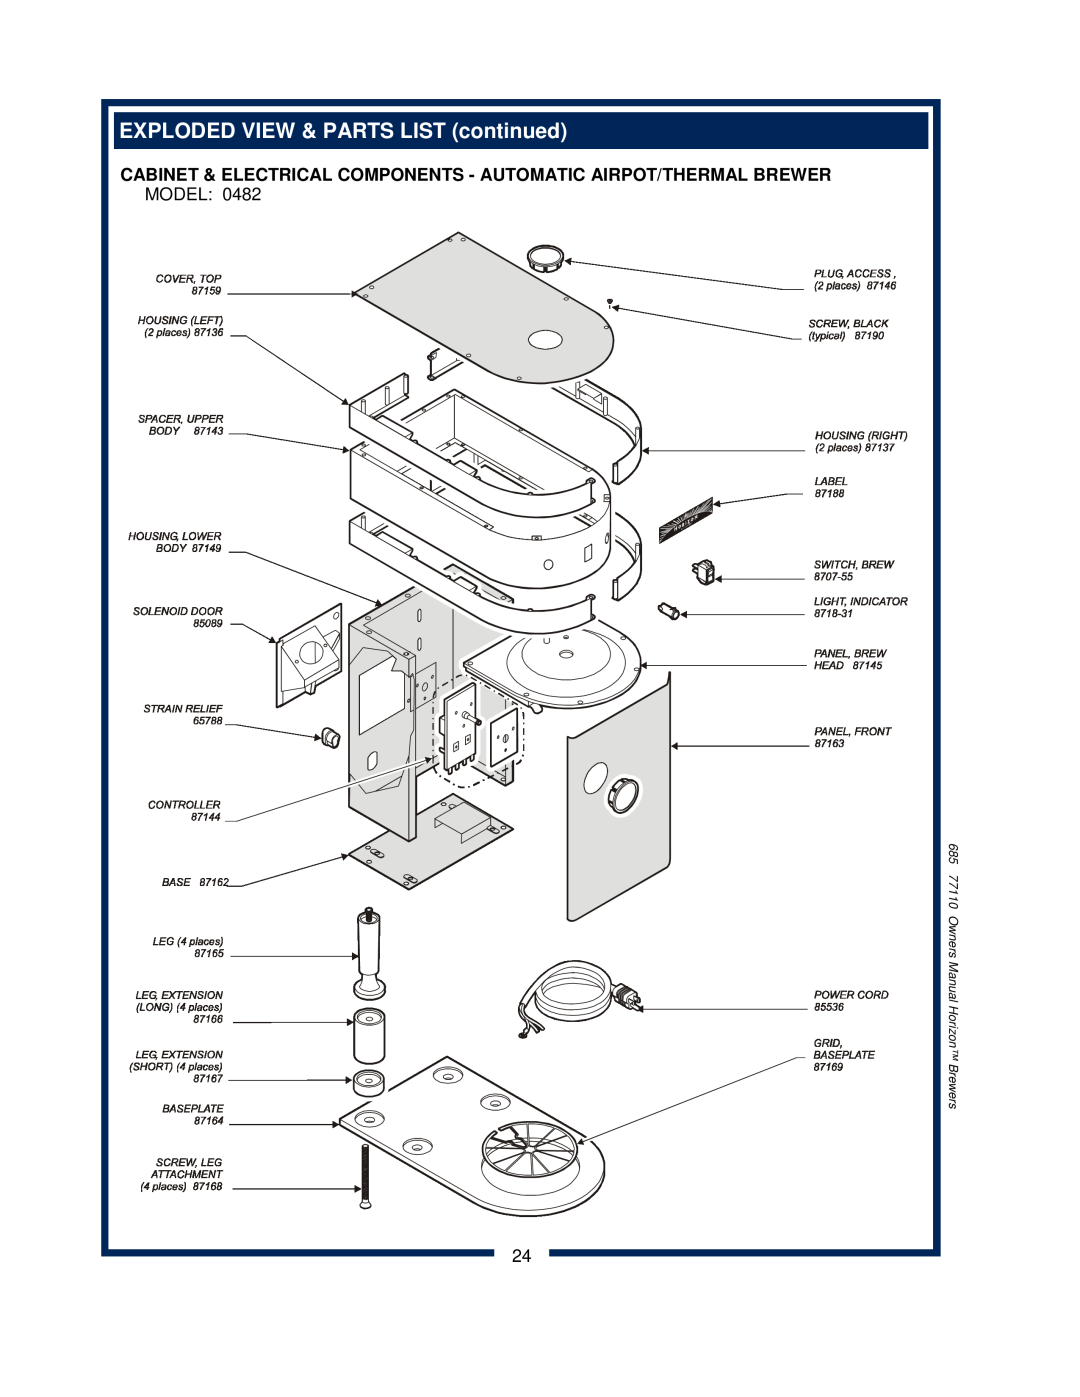 Bloomfield 0443 EXPLODED VIEW & PARTS LIST continued, Cabinet & Electrical Components - Automatic Airpot/Thermal Brewer 